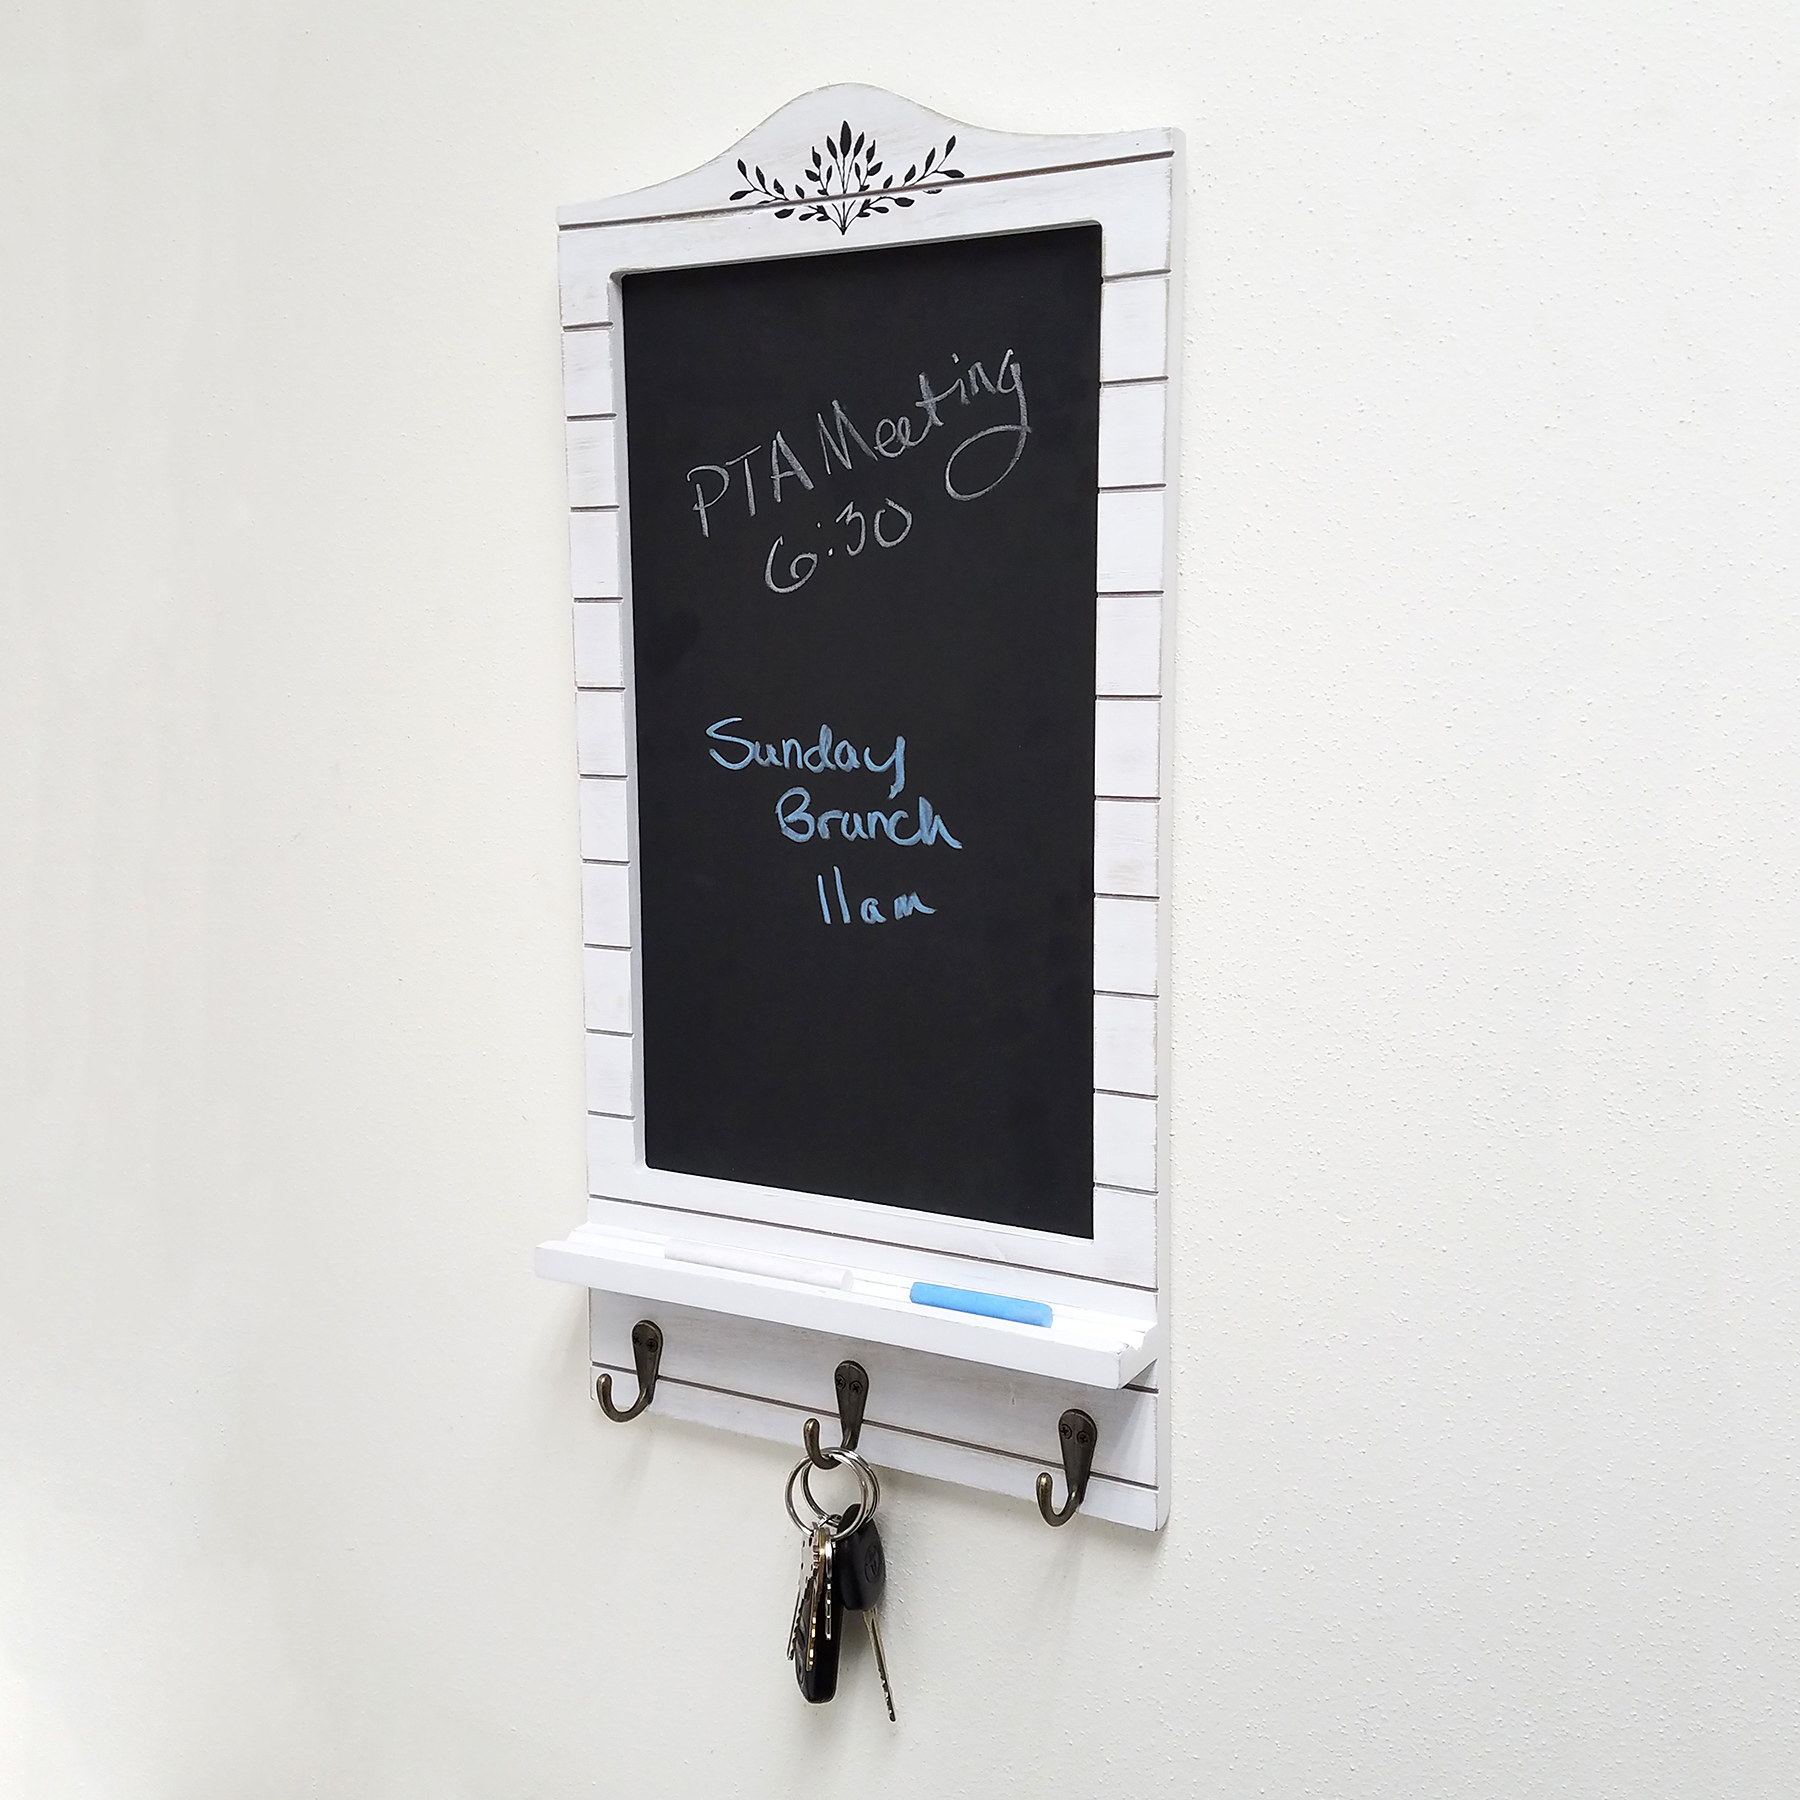 The chalkboard has a wooden white frame and three key hooks